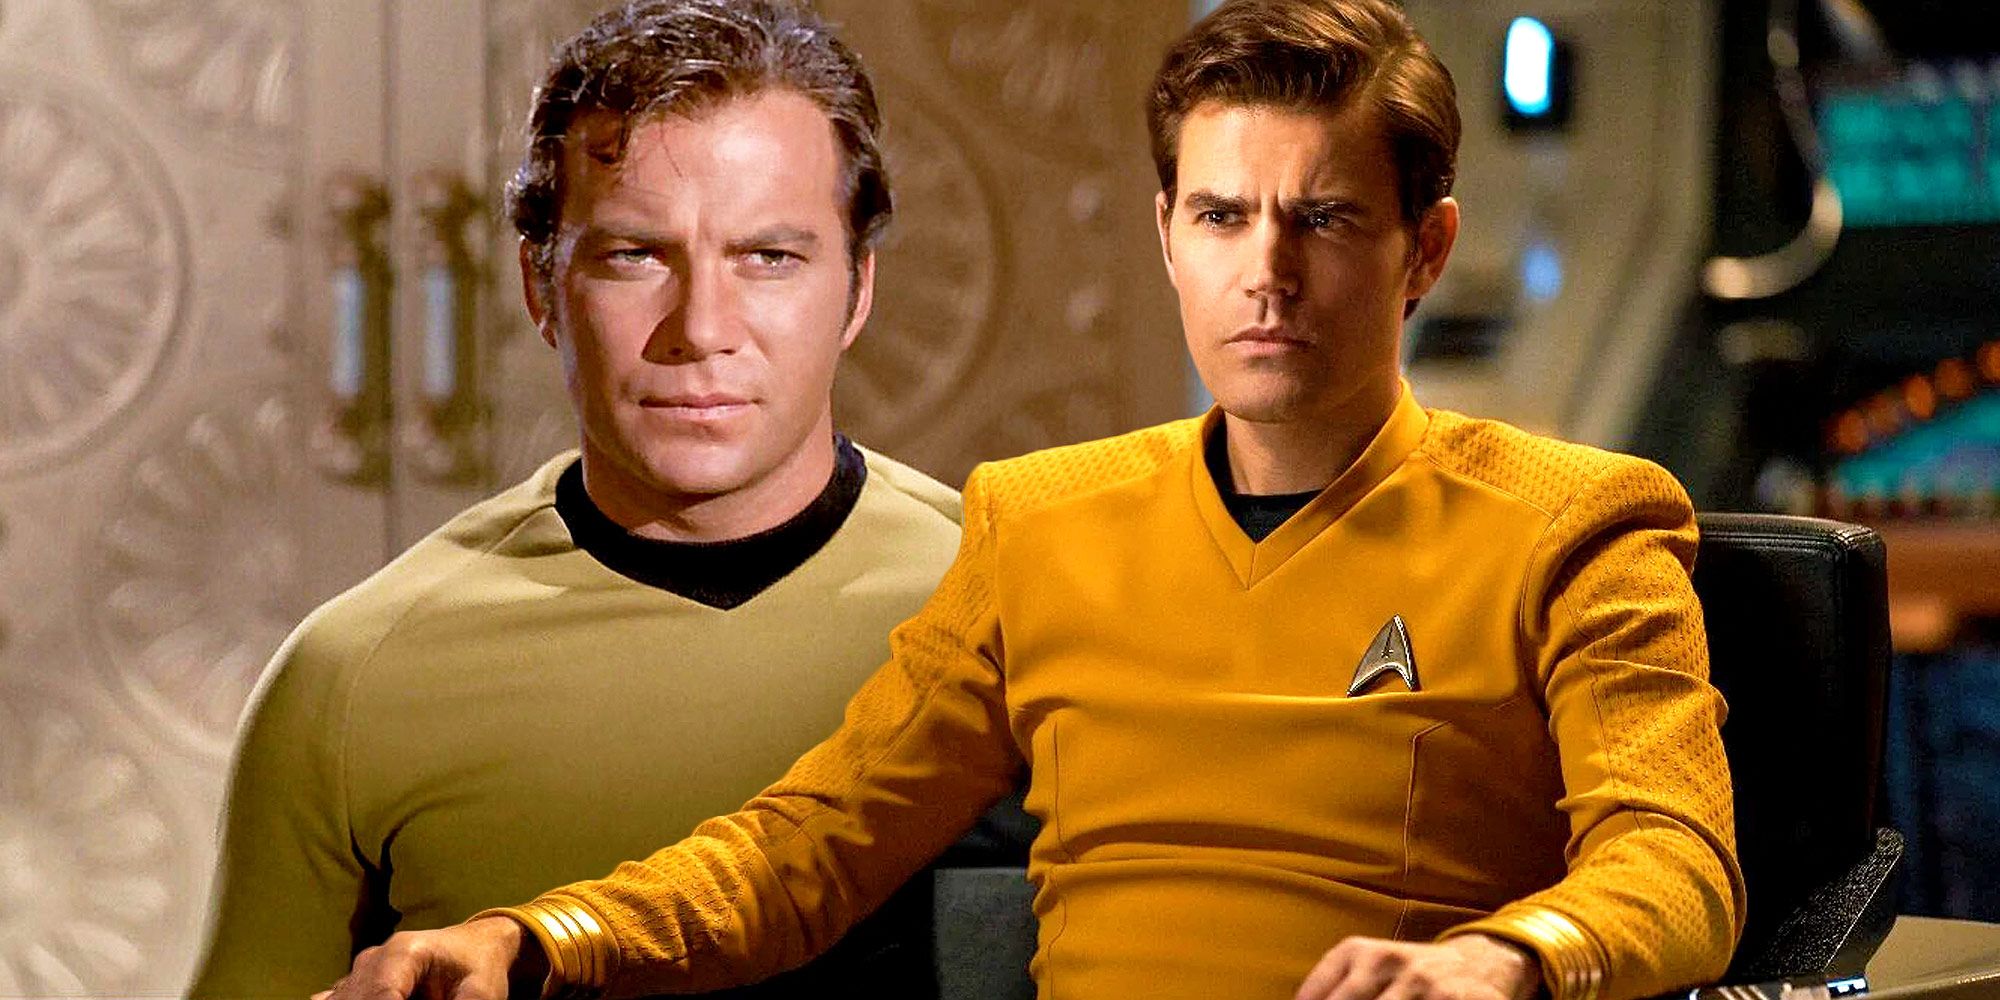 Paul Wesley Reacts to Captain Kirk Casting, William Shatner